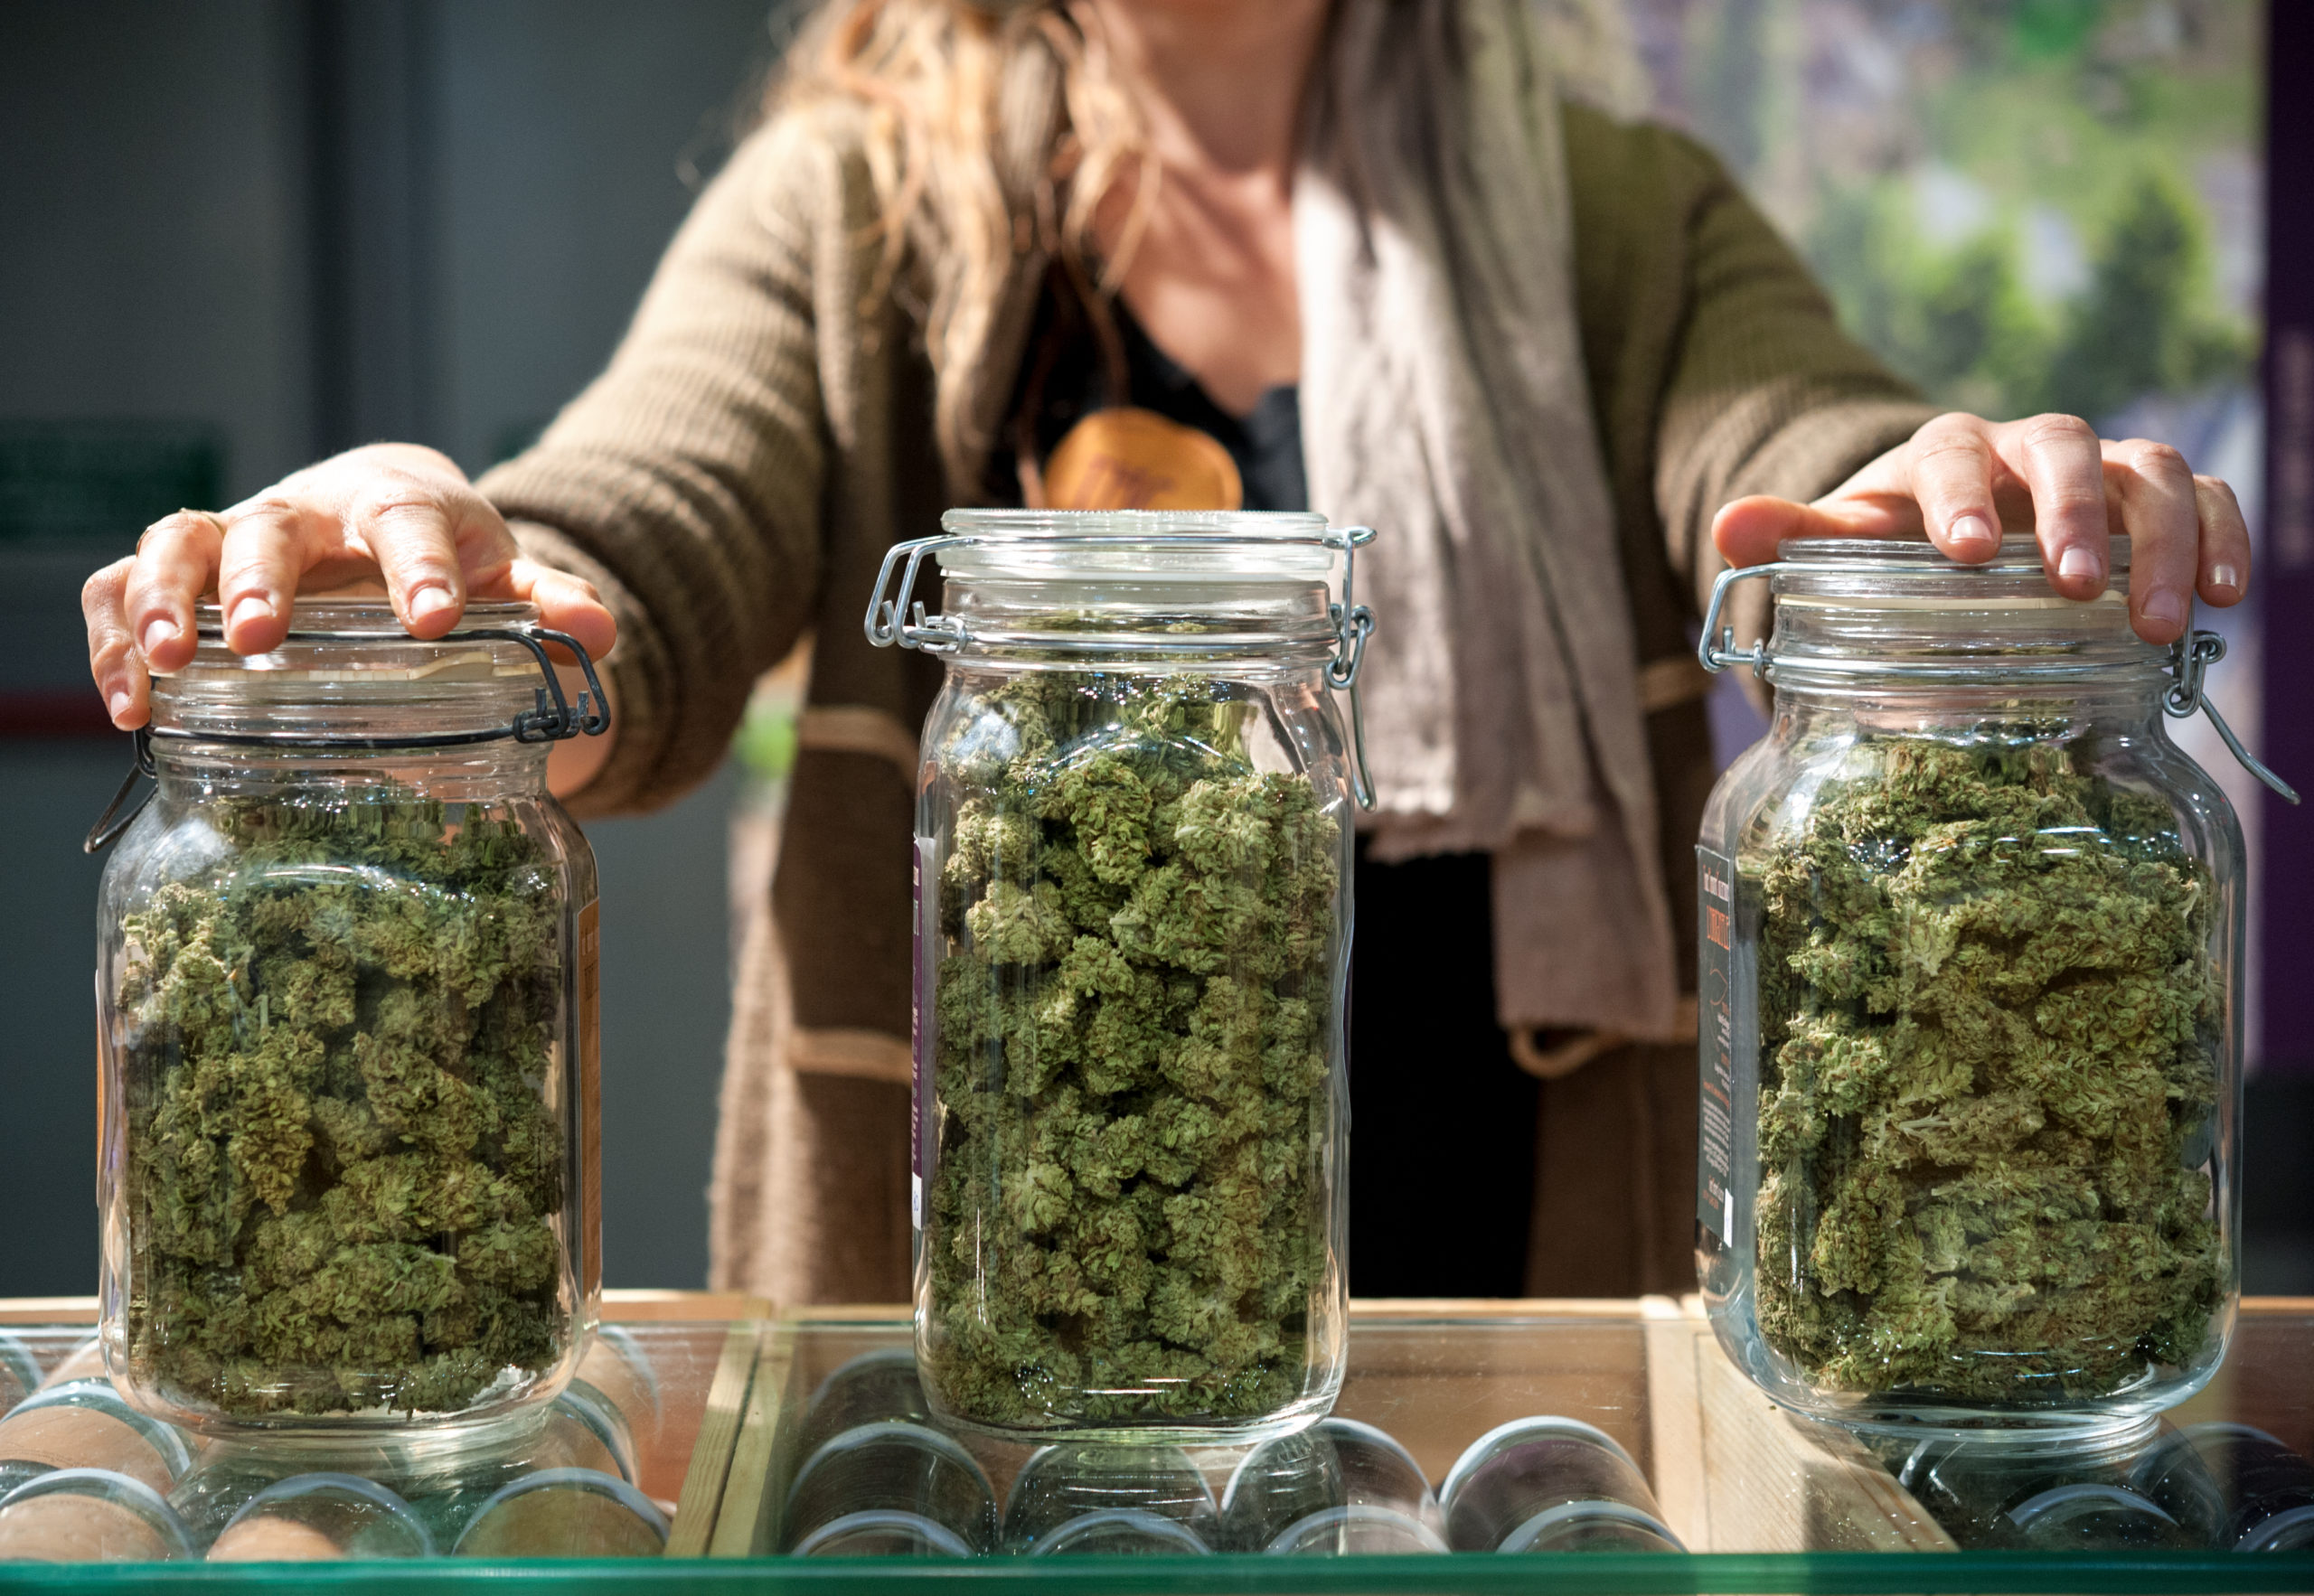 Know how important it is to buy weed online with quality dispensaries